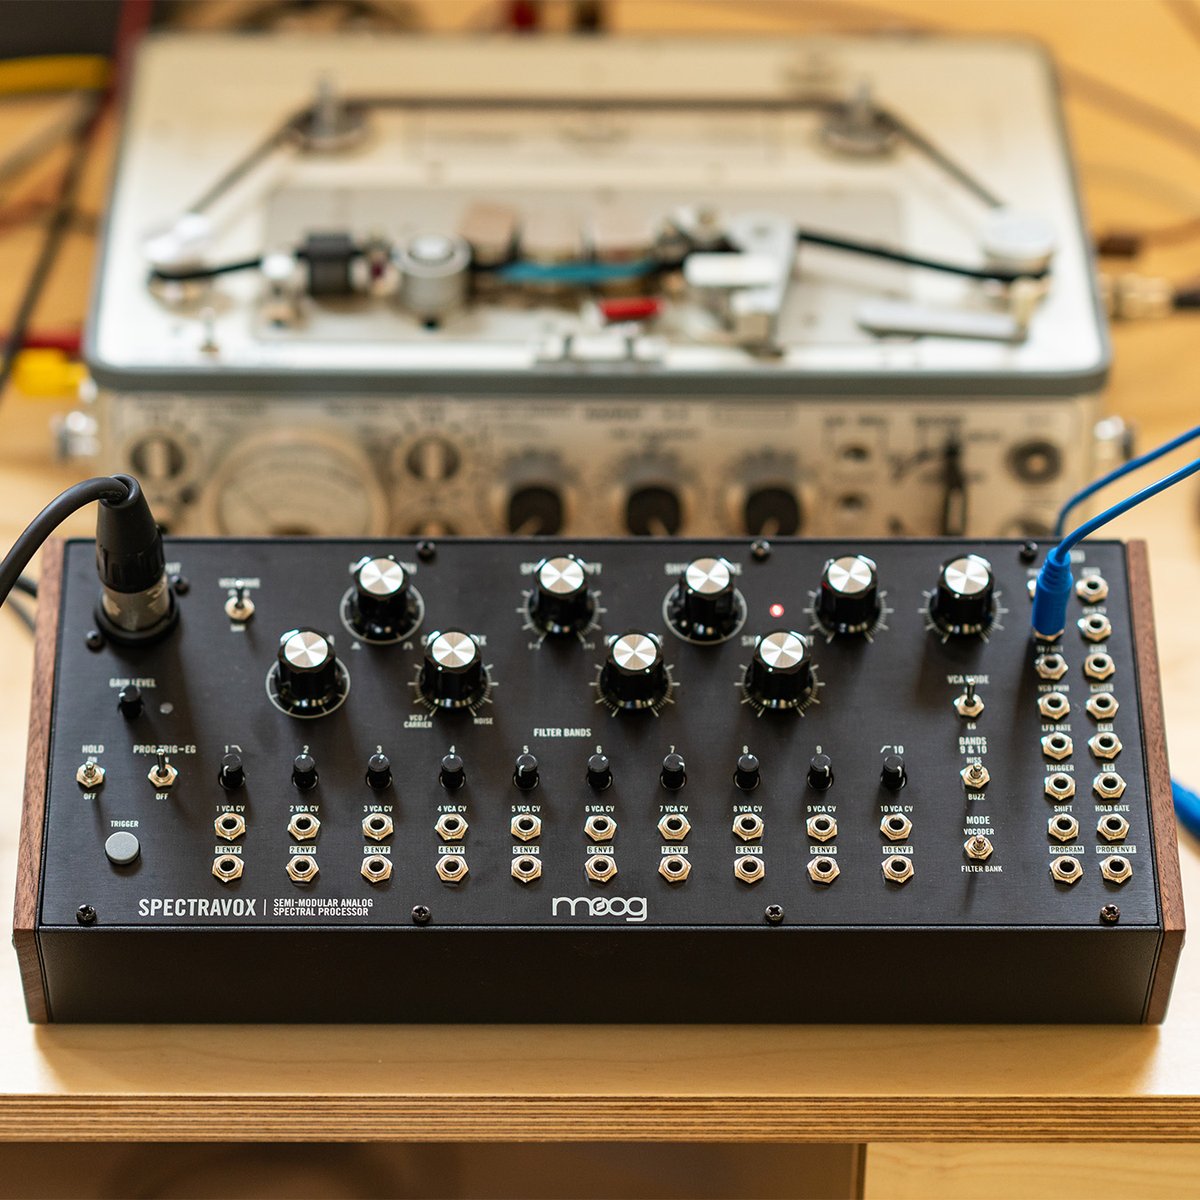 Meet the latest addition to the Moog semi-modular synth family with the @moogmusicinc Spectravox semi-modular synthesizer, now available at Chicago Synth Exchange! Learn more on our Soundboard Blog! bit.ly/3UJdJwG #CME #chicagosynthexchange #Moog #MoogSynthesizers